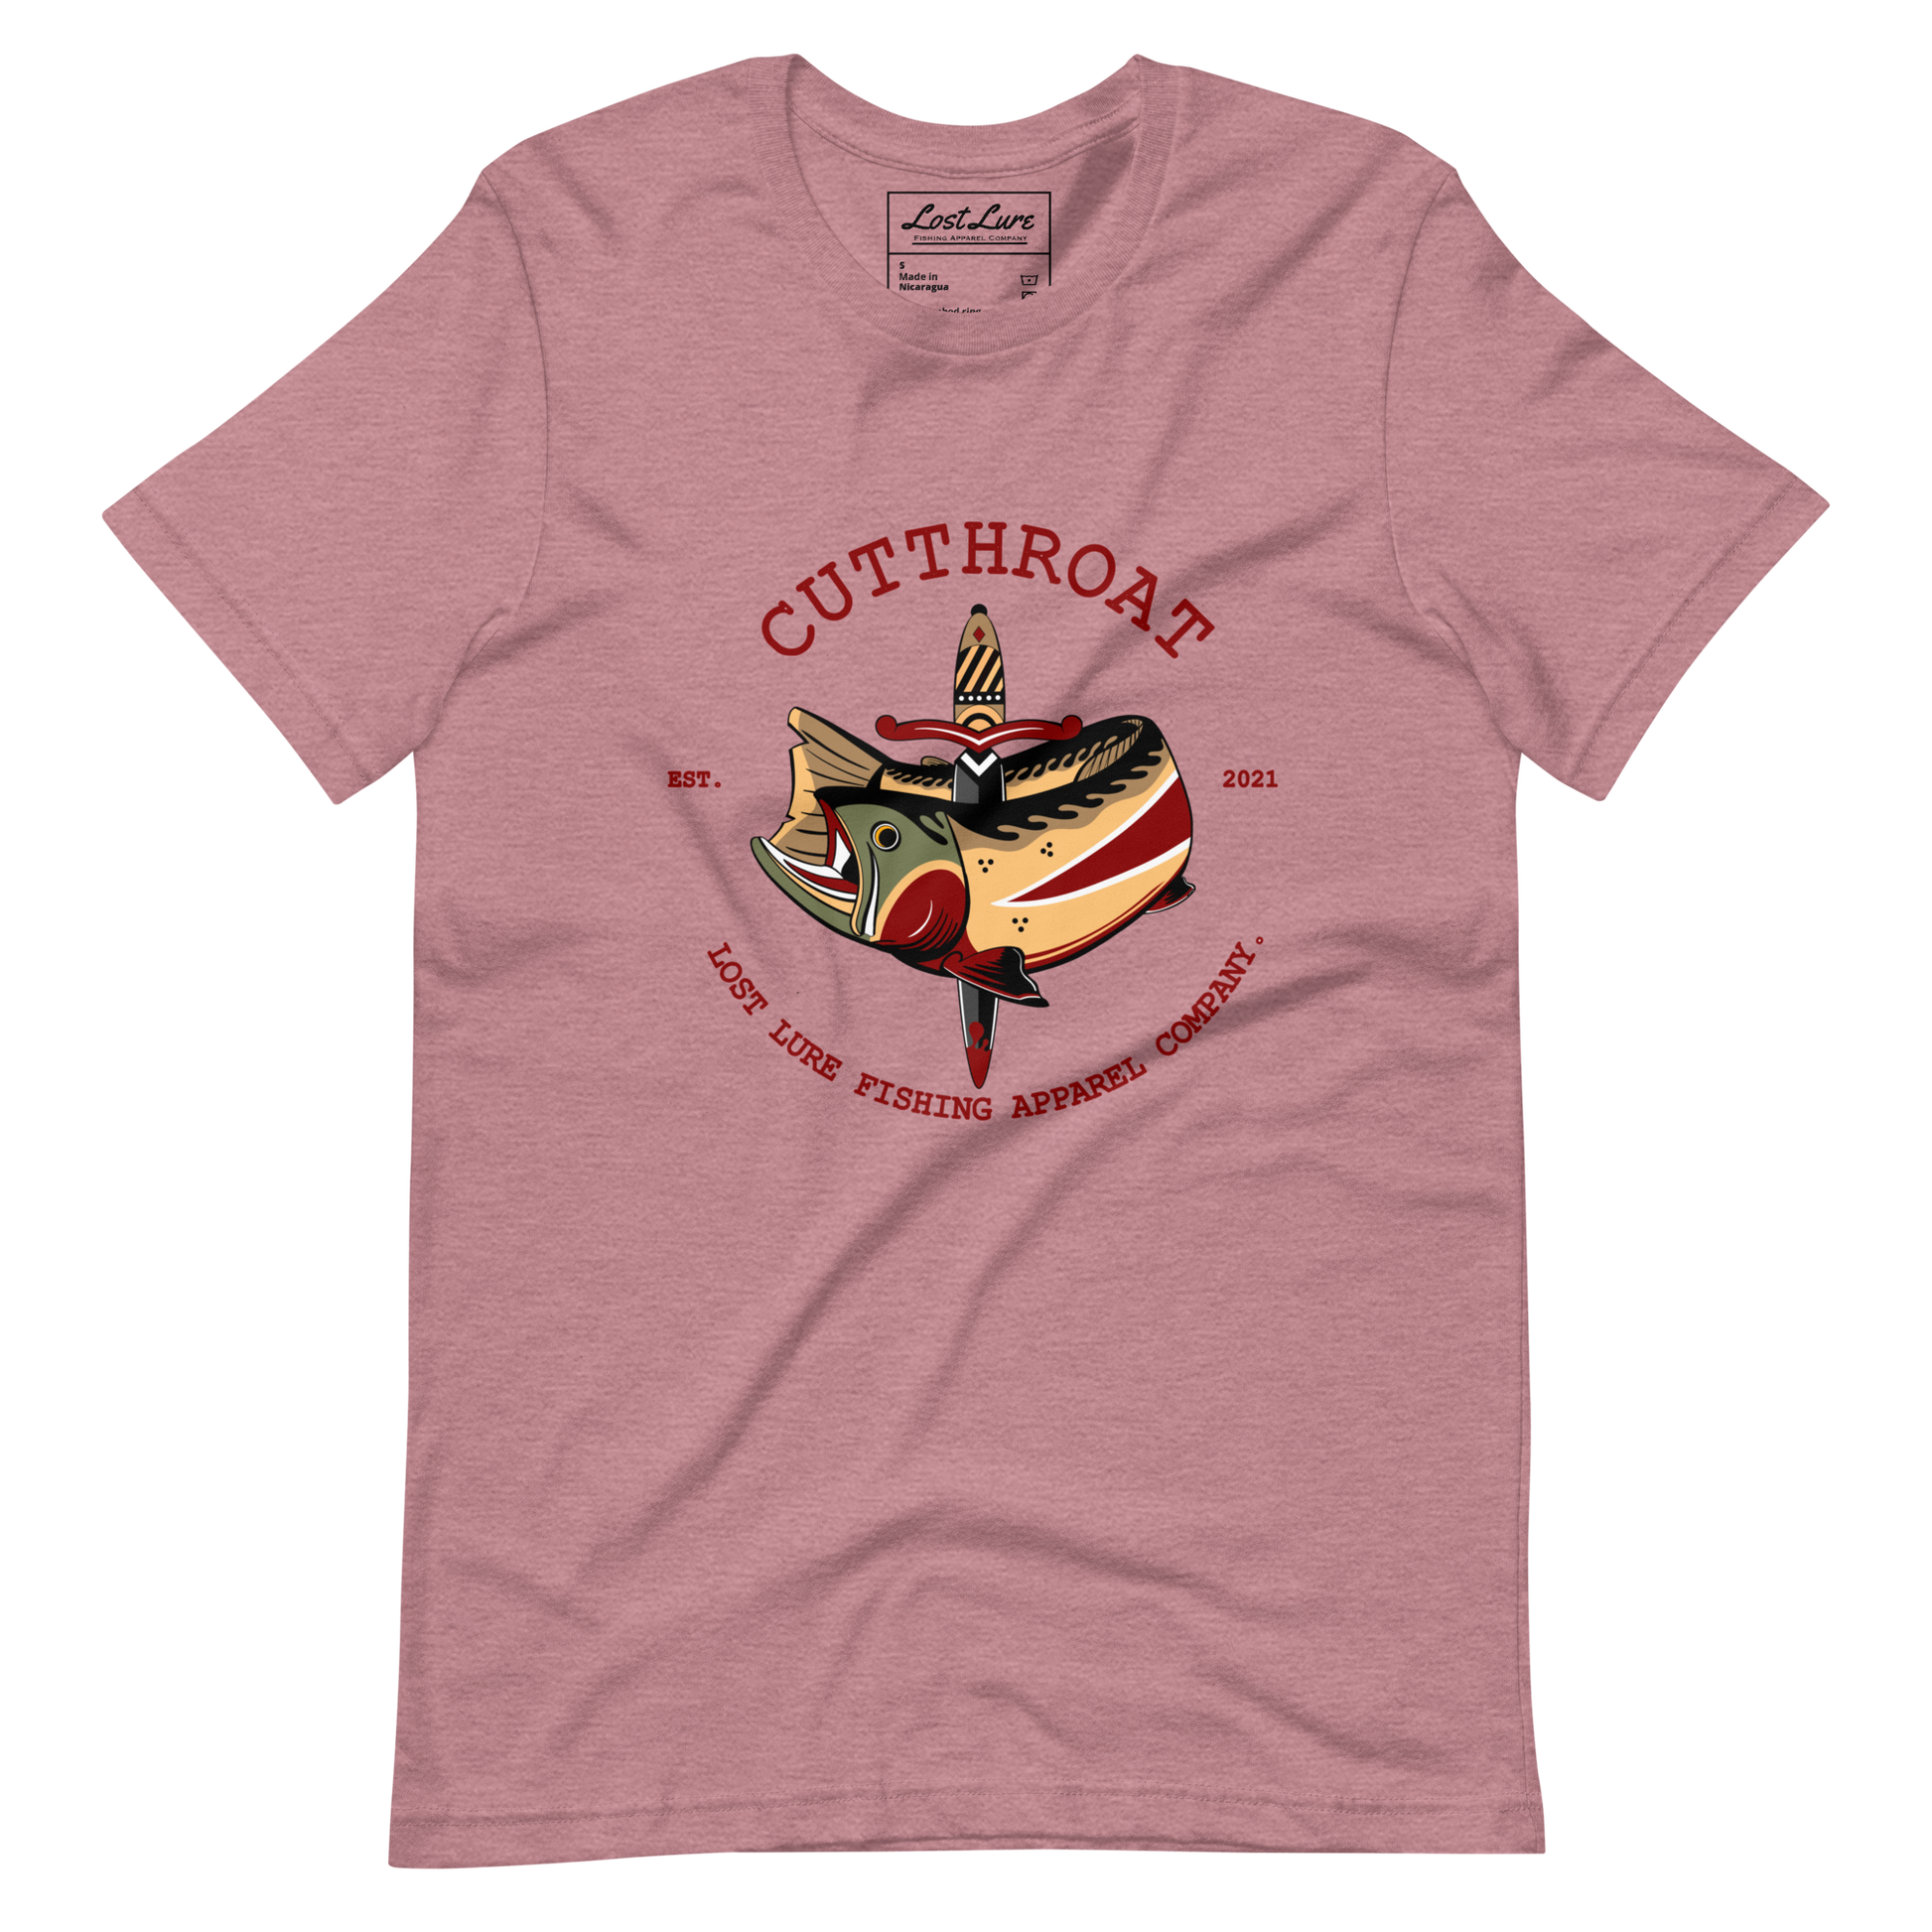 Cutthroat Trout fishing shirt. It’s an American traditional style design with a cutthroat trout and a dagger. The shirt reads Cutthroat trout, est. 2021, lost lure fishing apparel company. The fishing design is on the front of the shirt. Salmon colored fishing shirt